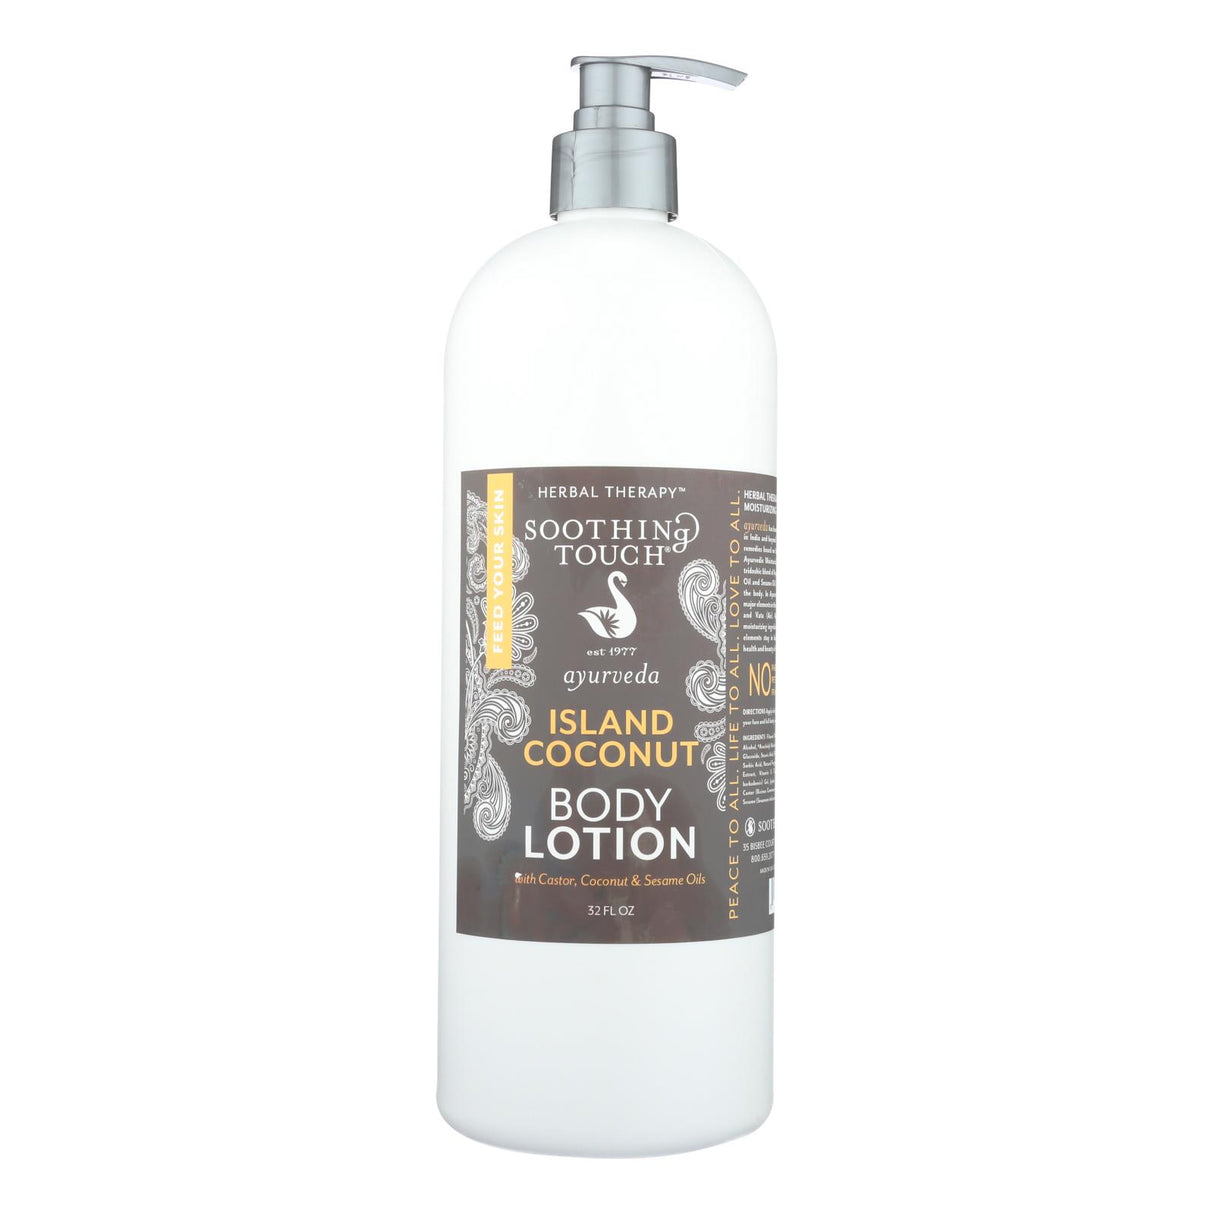 Soothing Touch - Island Coconut Body Lotion - 32 Fz